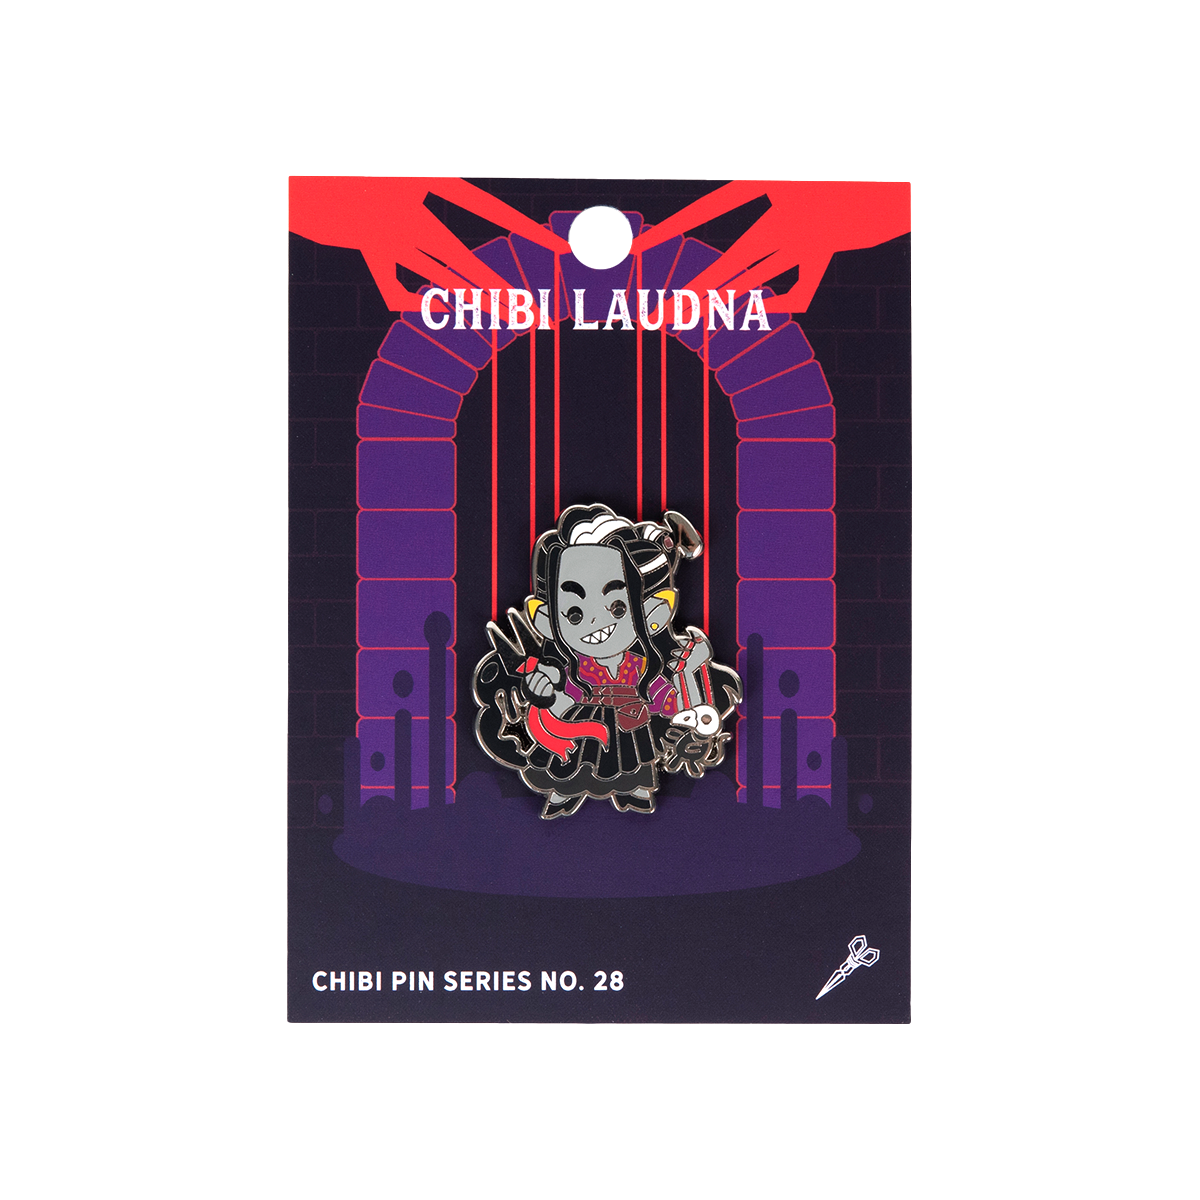 Launda enamel pin, inspired by Critical Role campaign 3, Hells Bells